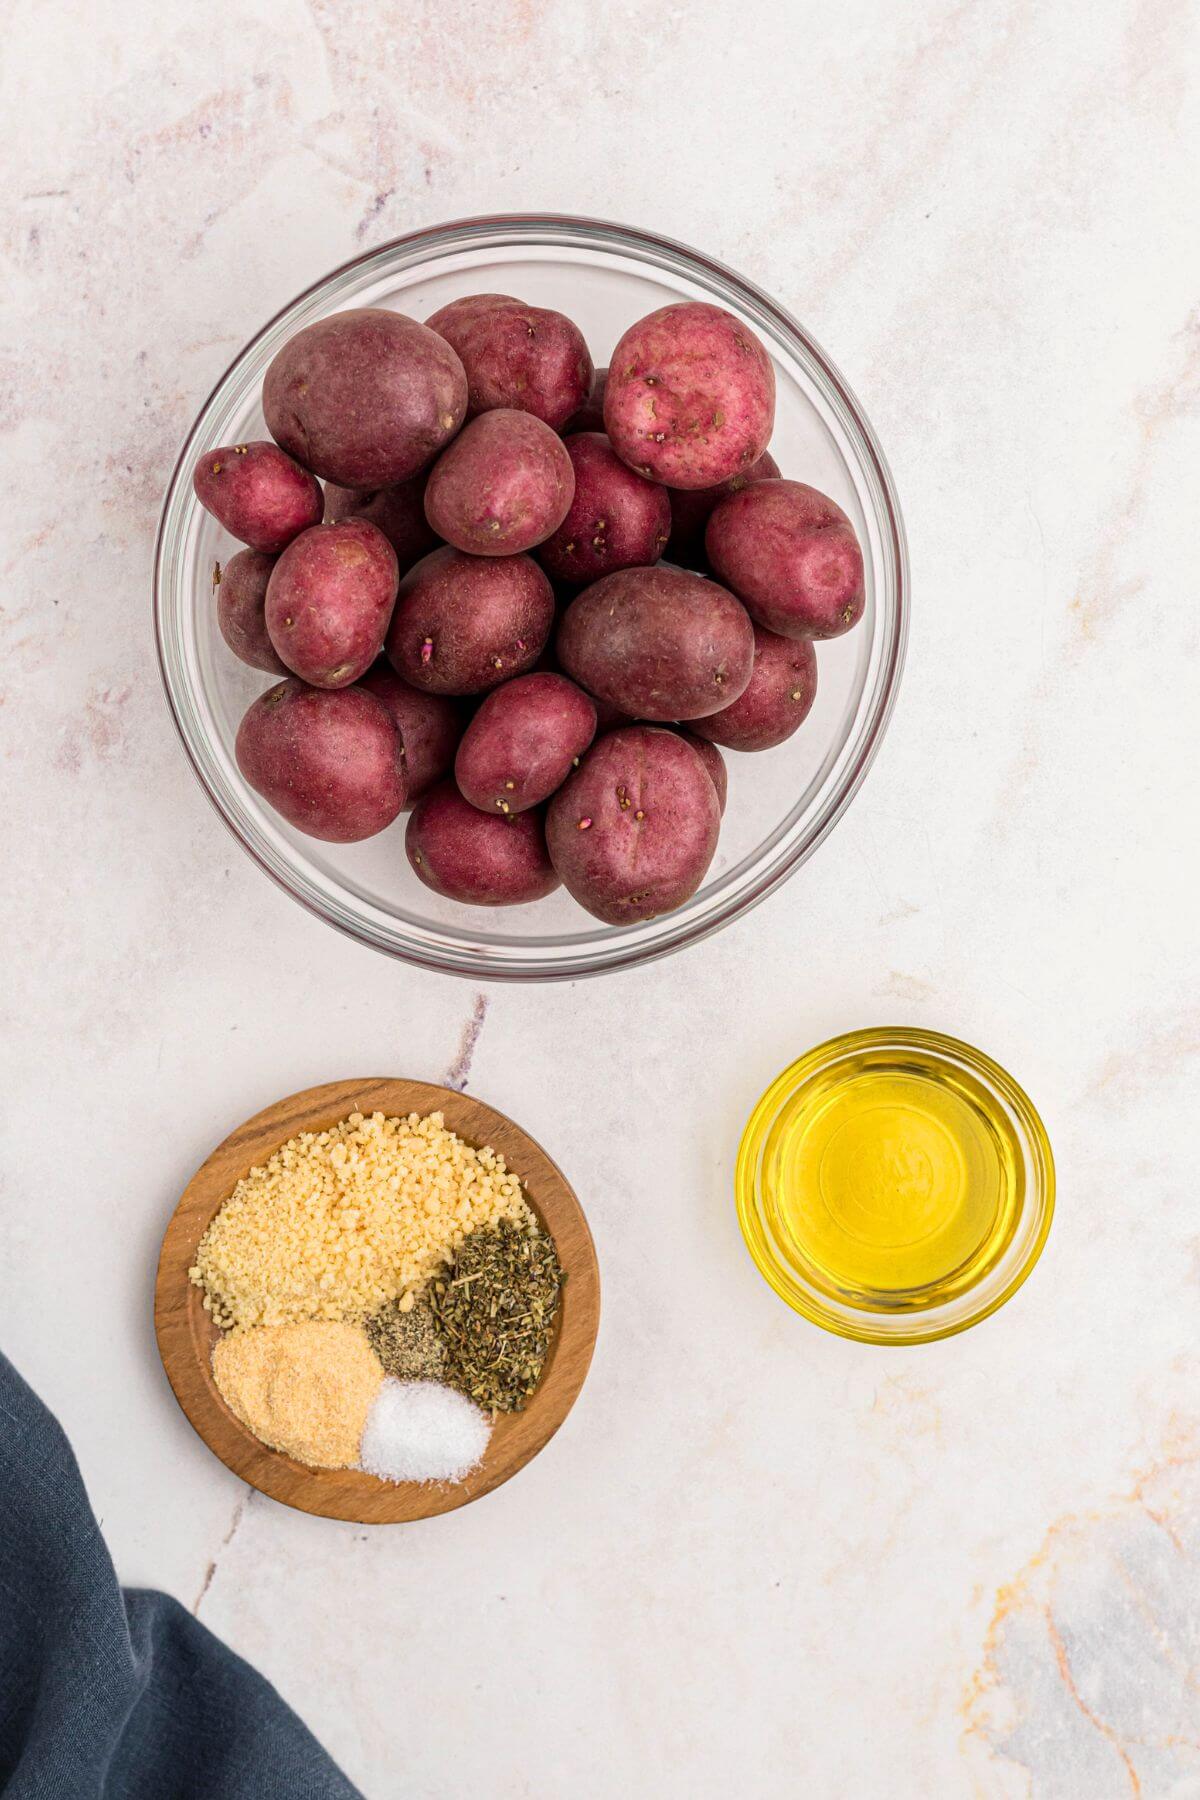 Uncooked red baby potatoes in a clear glass bowl with olive oil, seasonings and parmesan cheese on a marble table.